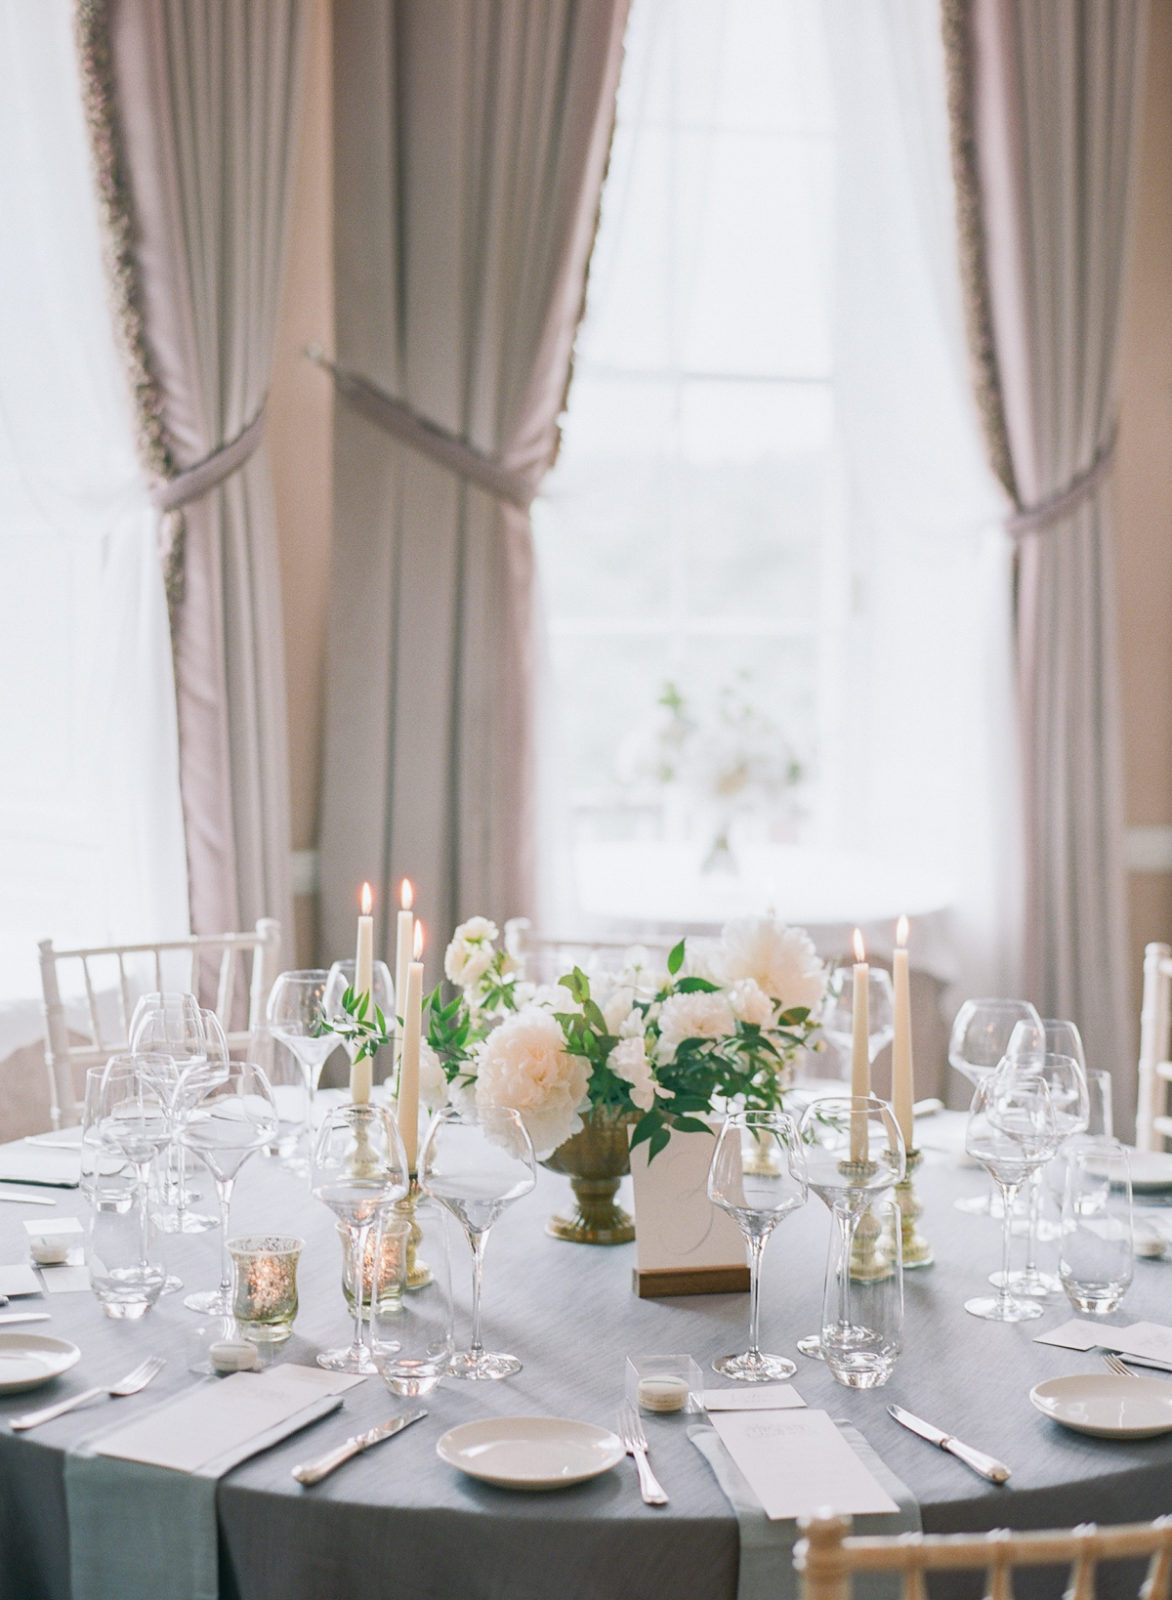 Ireland Film Photographer | Molly Carr Photography | Wedding Reception Decor with White Flowers on Candlelit Table